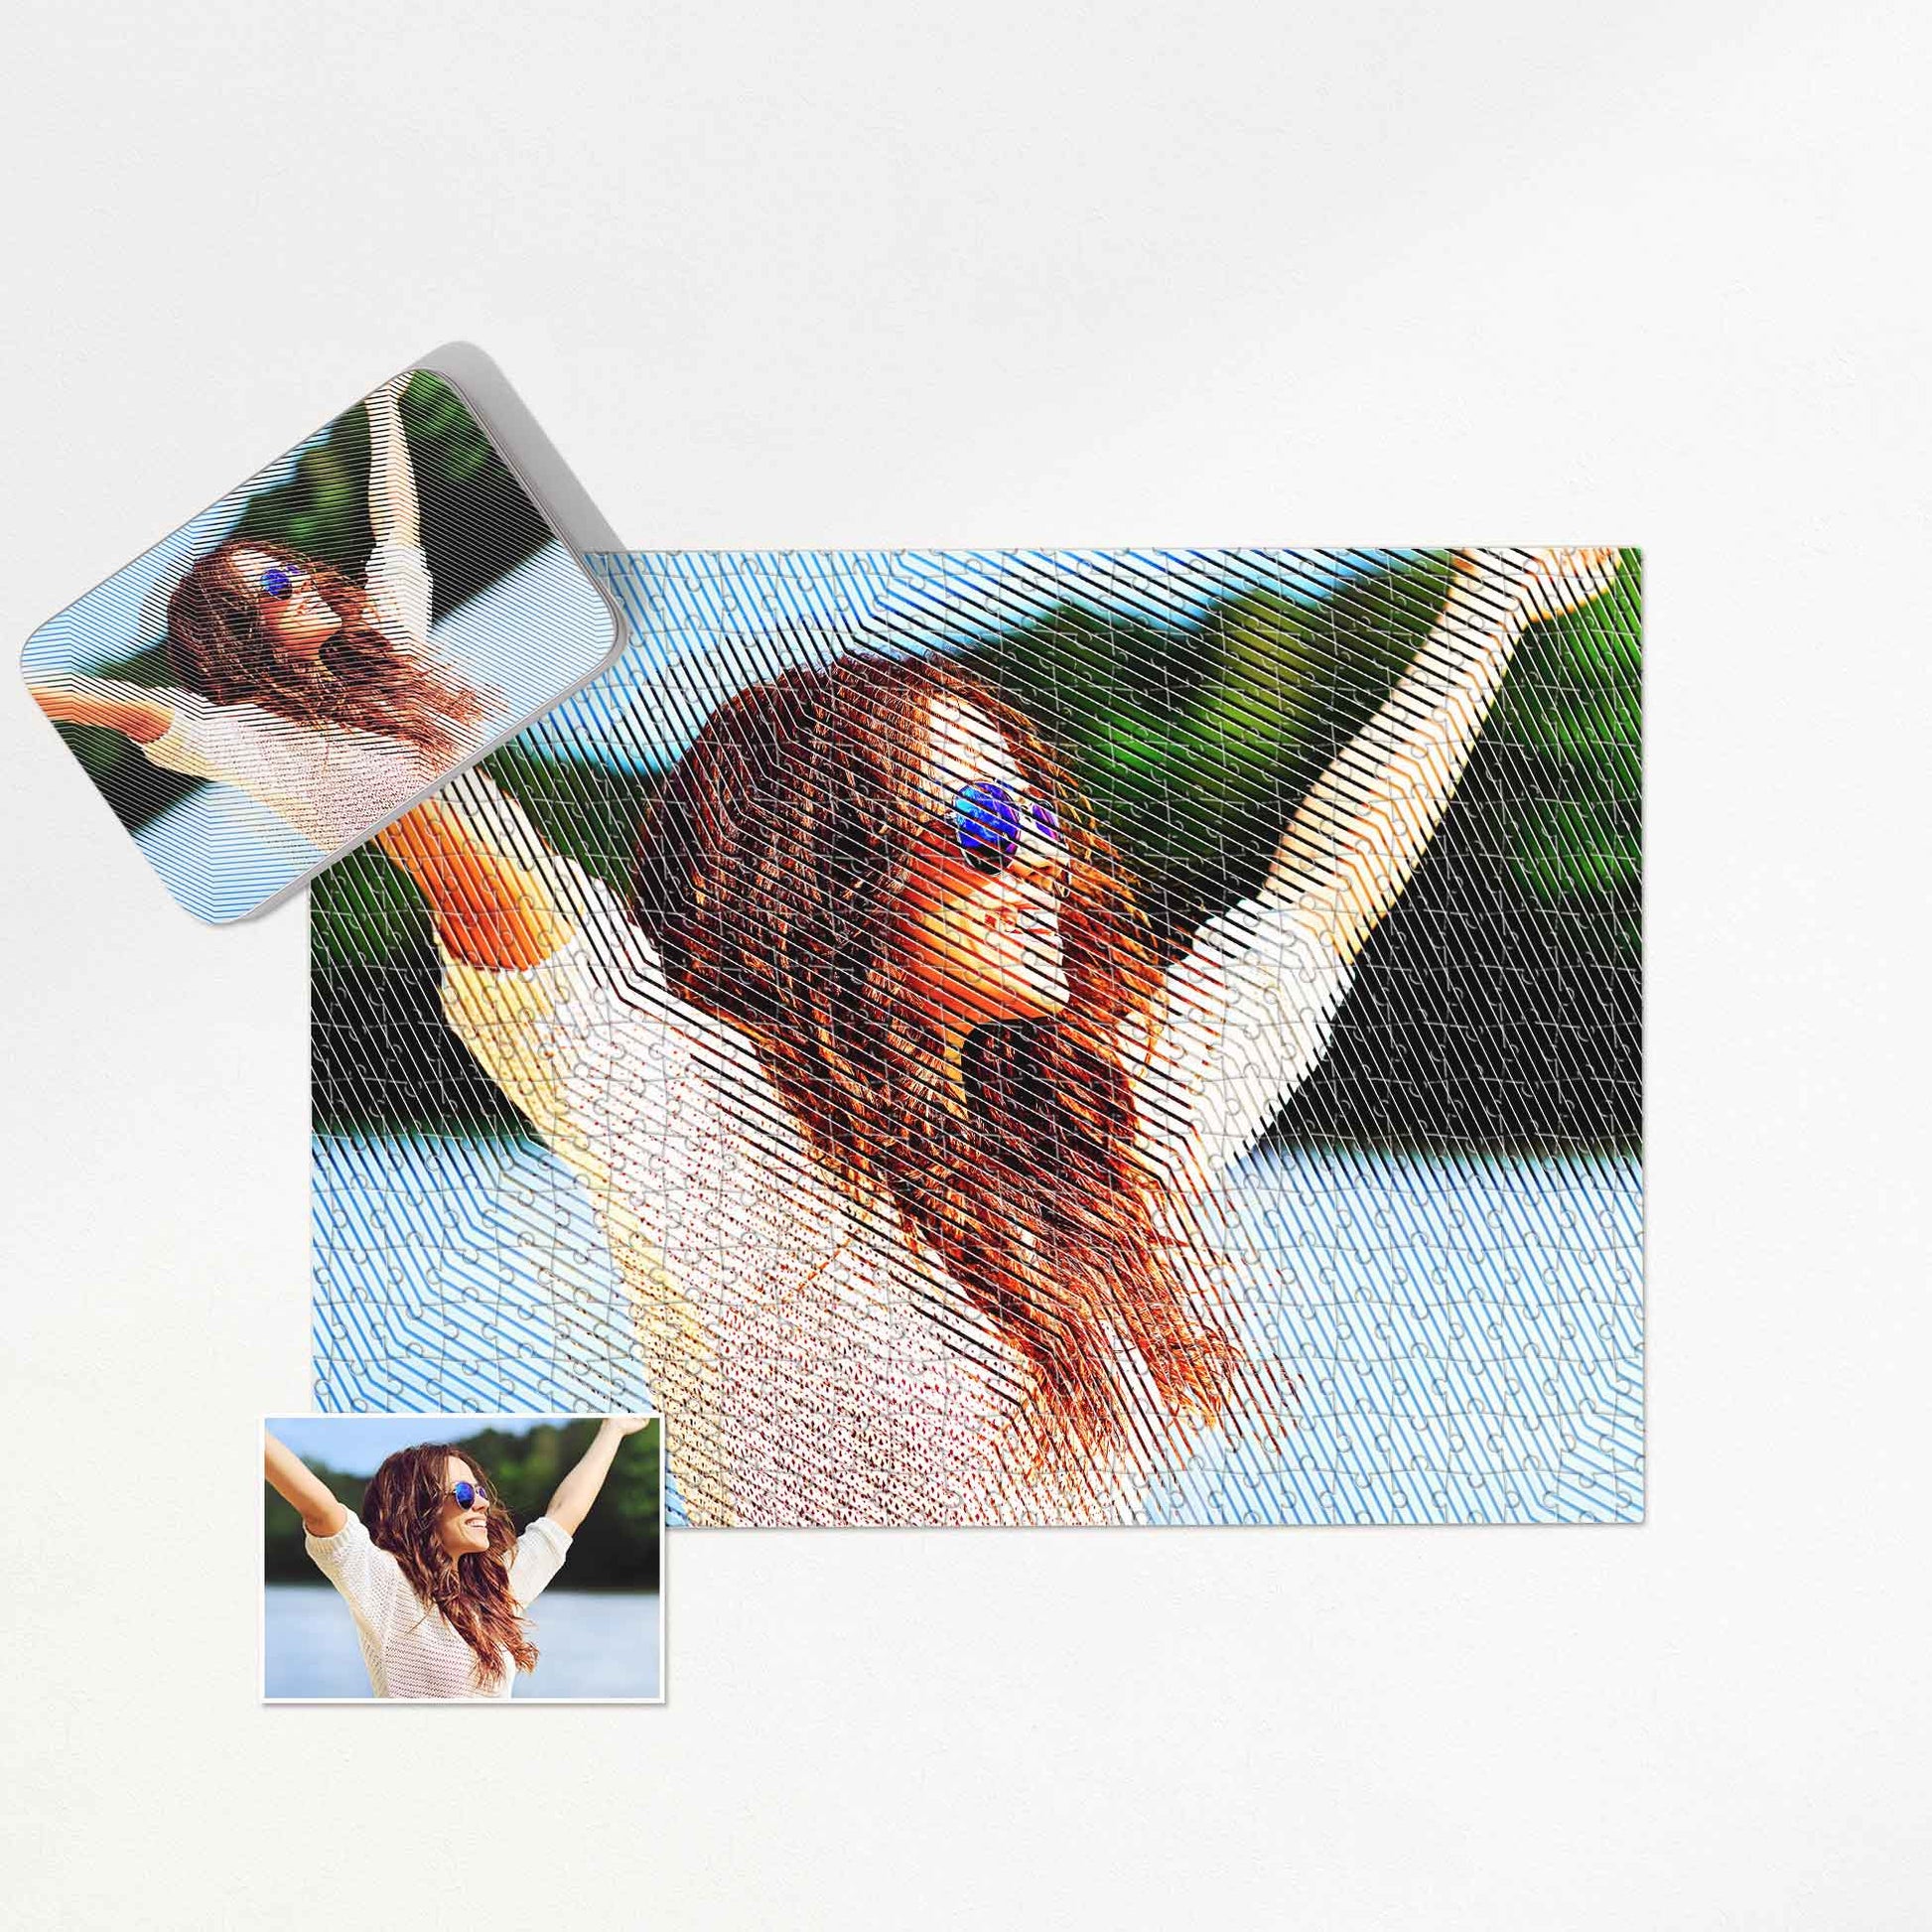 Capture memories with a Personalised Abstract Lines Jigsaw Puzzle. Print from photo in modern abstract style, featuring a vivid, sharp image. Handmade on wooden or cardboard pieces, this dynamic and imaginative puzzle makes a unique and elegant gift